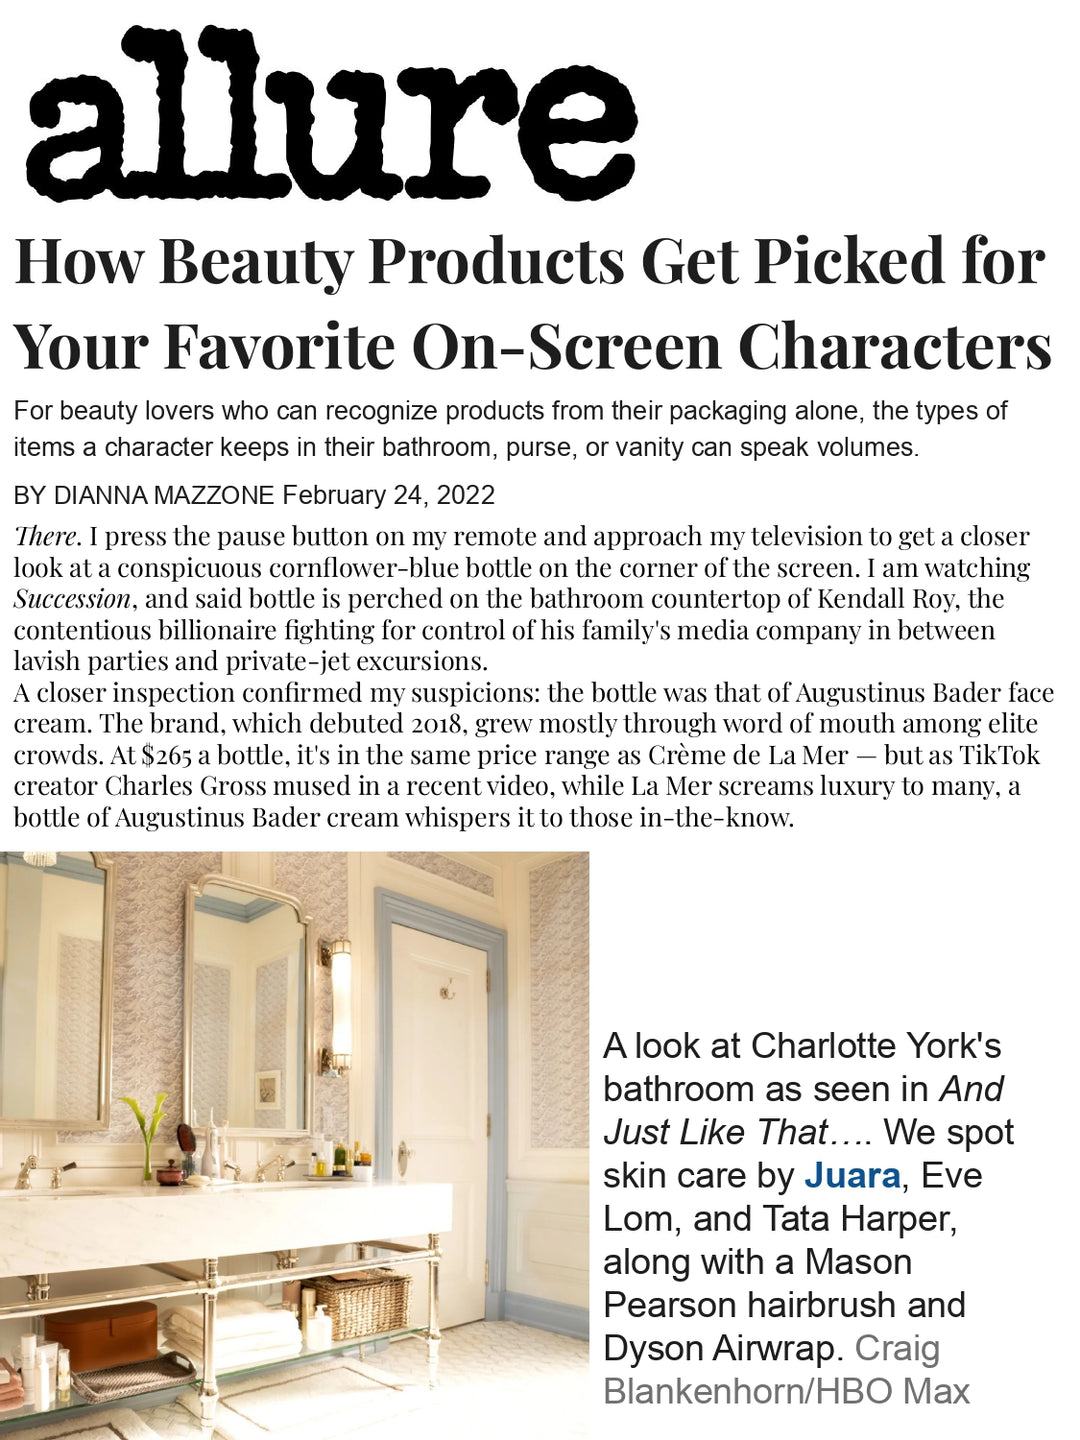 ALLURE: How Beauty Products Get Picked for Your Favorite On-Screen Characters